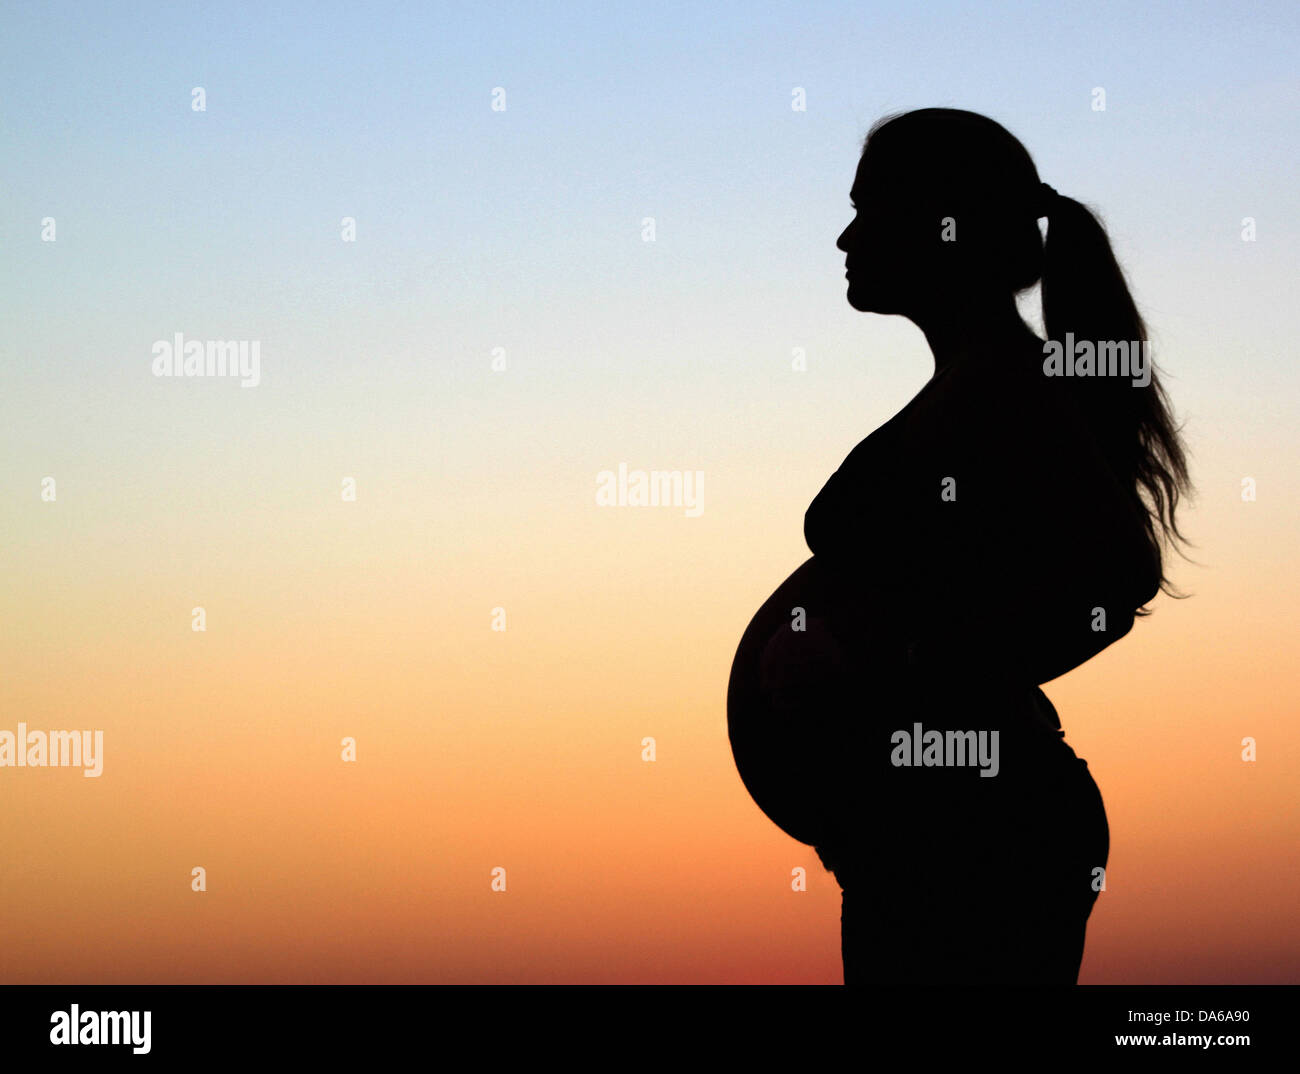 A side profile silhouette of a pregnant woman standing in front of a warm orange and blue sky Stock Photo